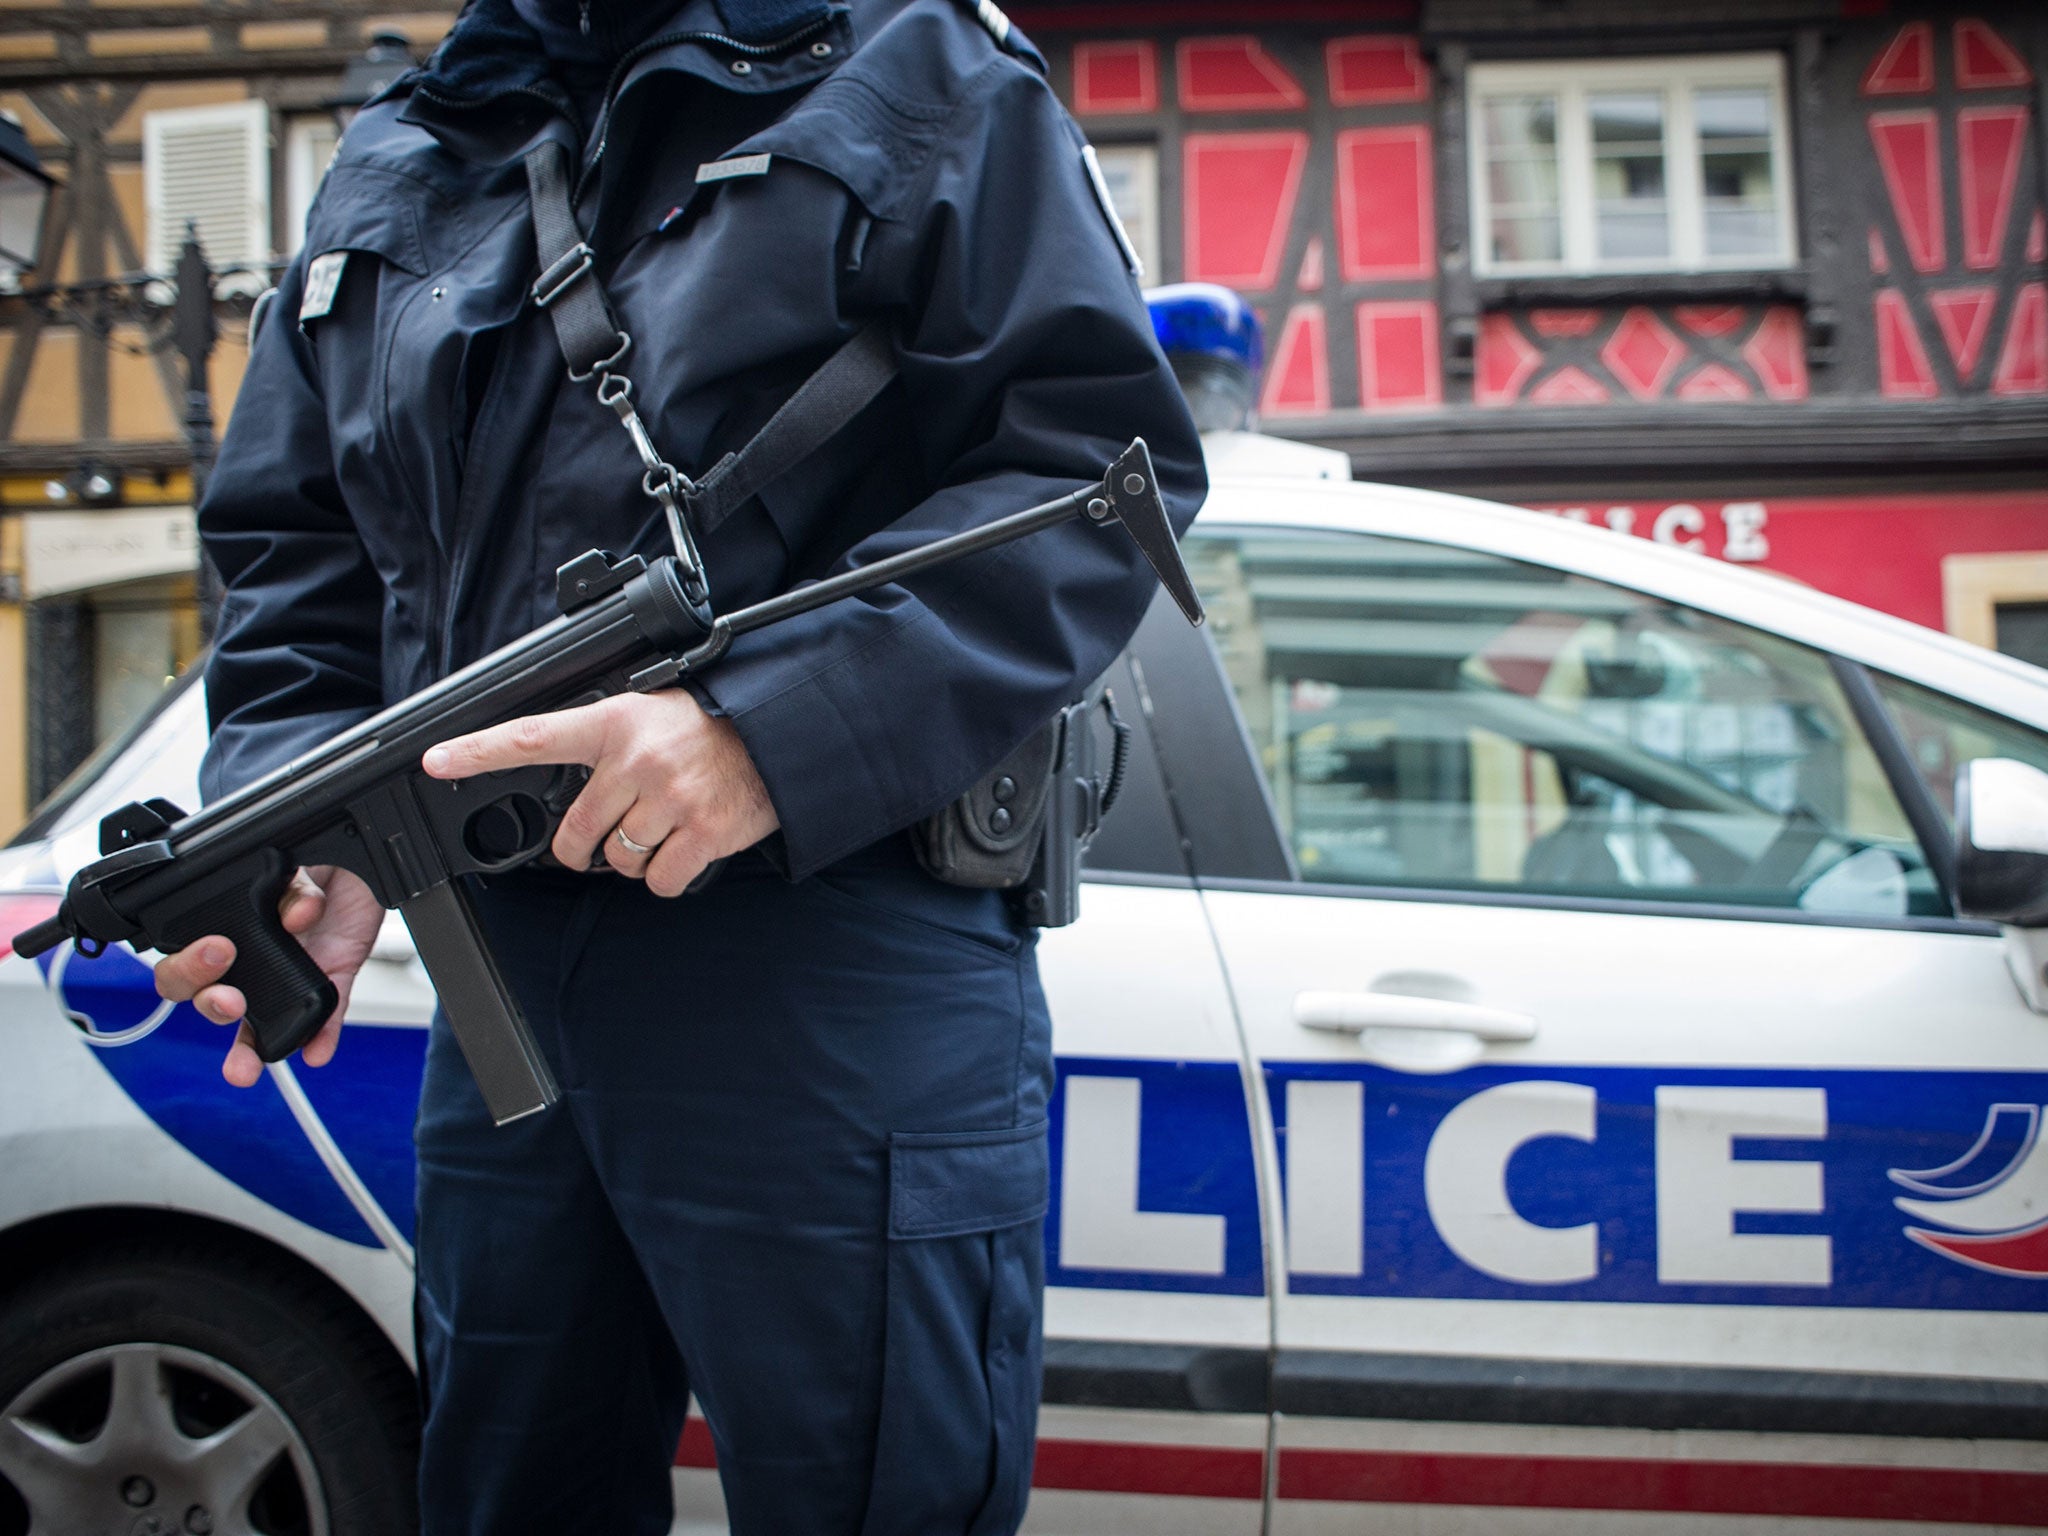 French policeman holds a weapon on 21 November, 2015 as he patrols at the Colmar Christmas market. French lawmakers gave near-unanimous backing on 20 November to a three-month extension of the state of emergency introduced following the Paris attacks